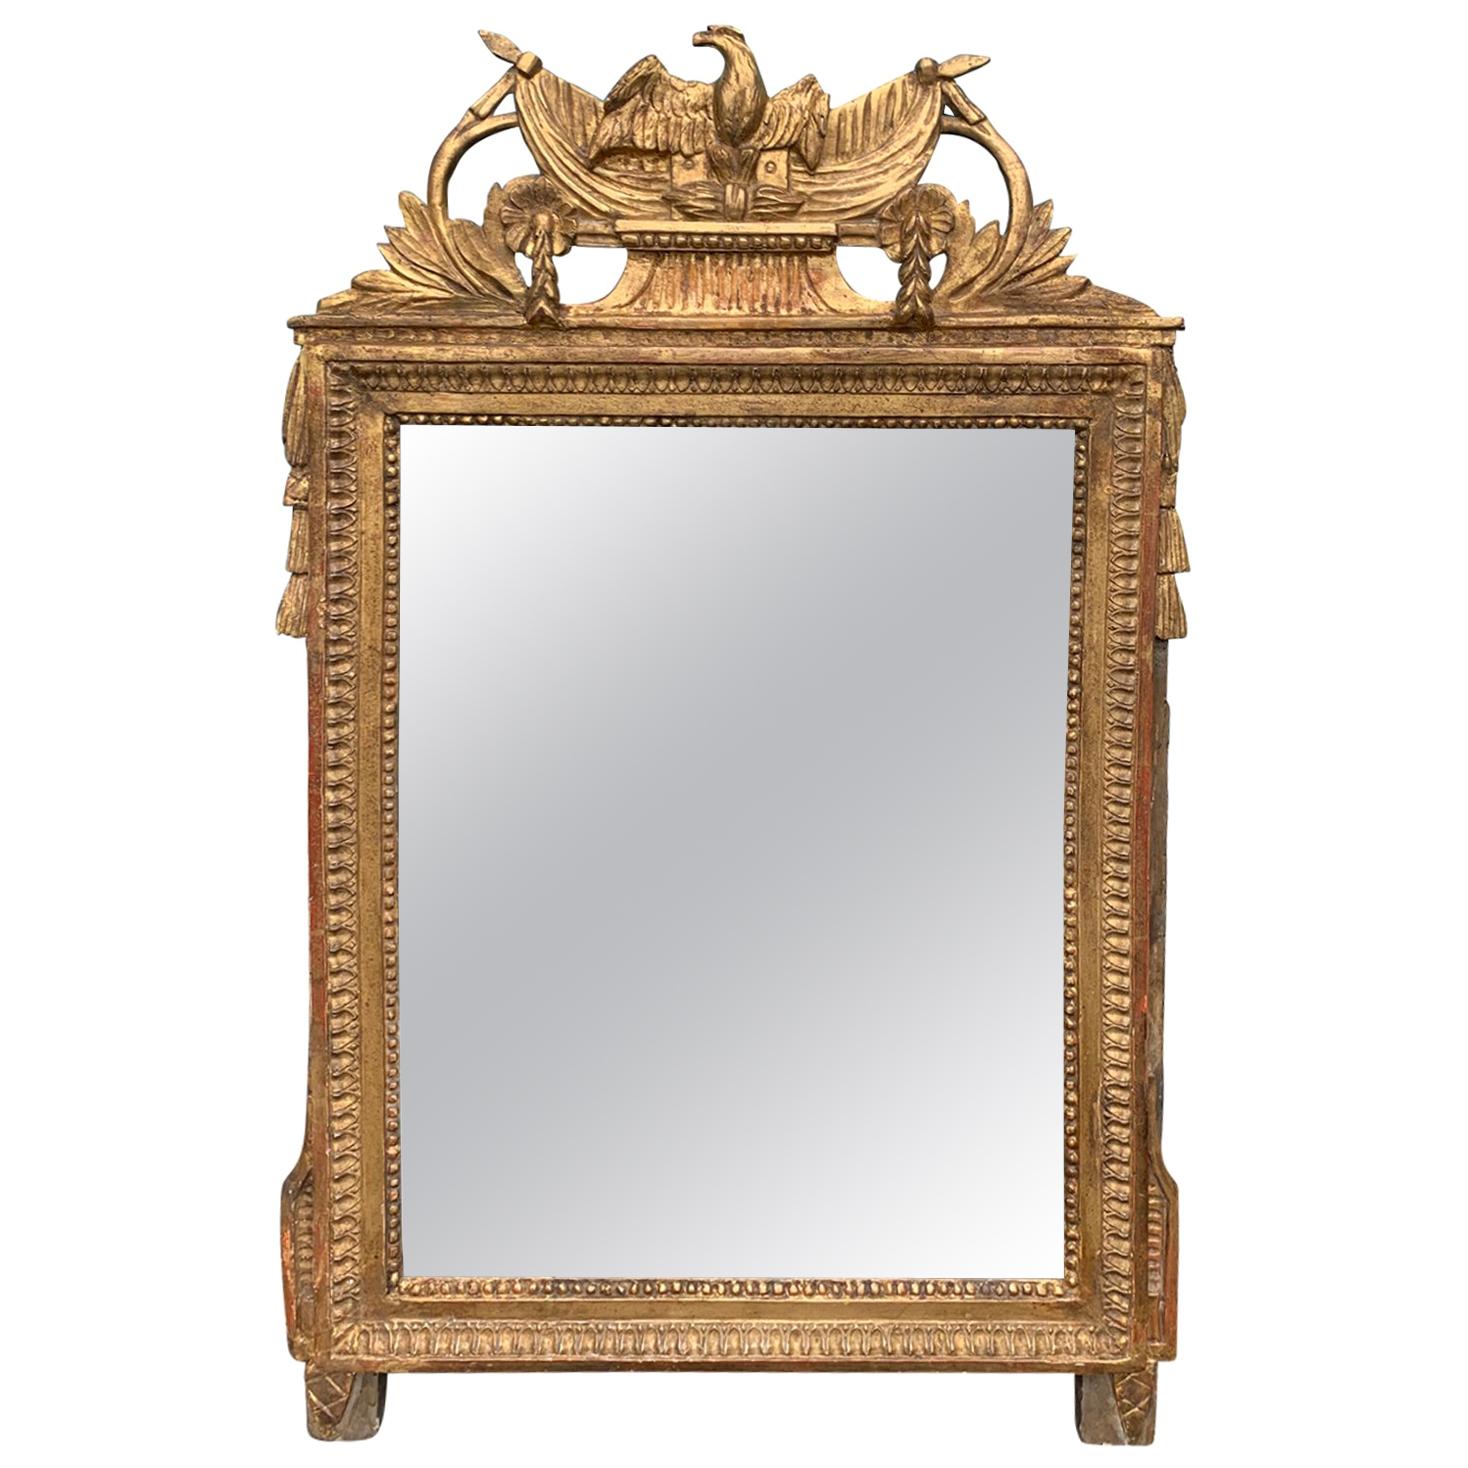 18th-19th Century Louis XVI Style Carved Giltwood Mirror with Eagle For Sale